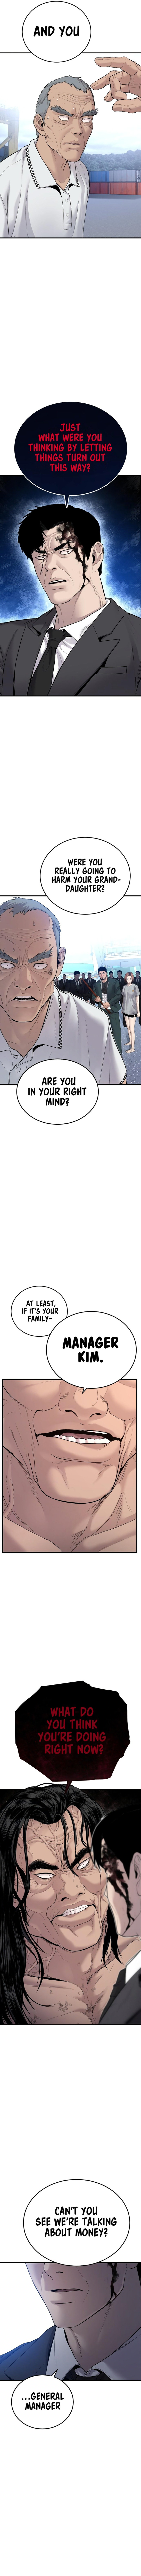 manager-kim-chap-68-15